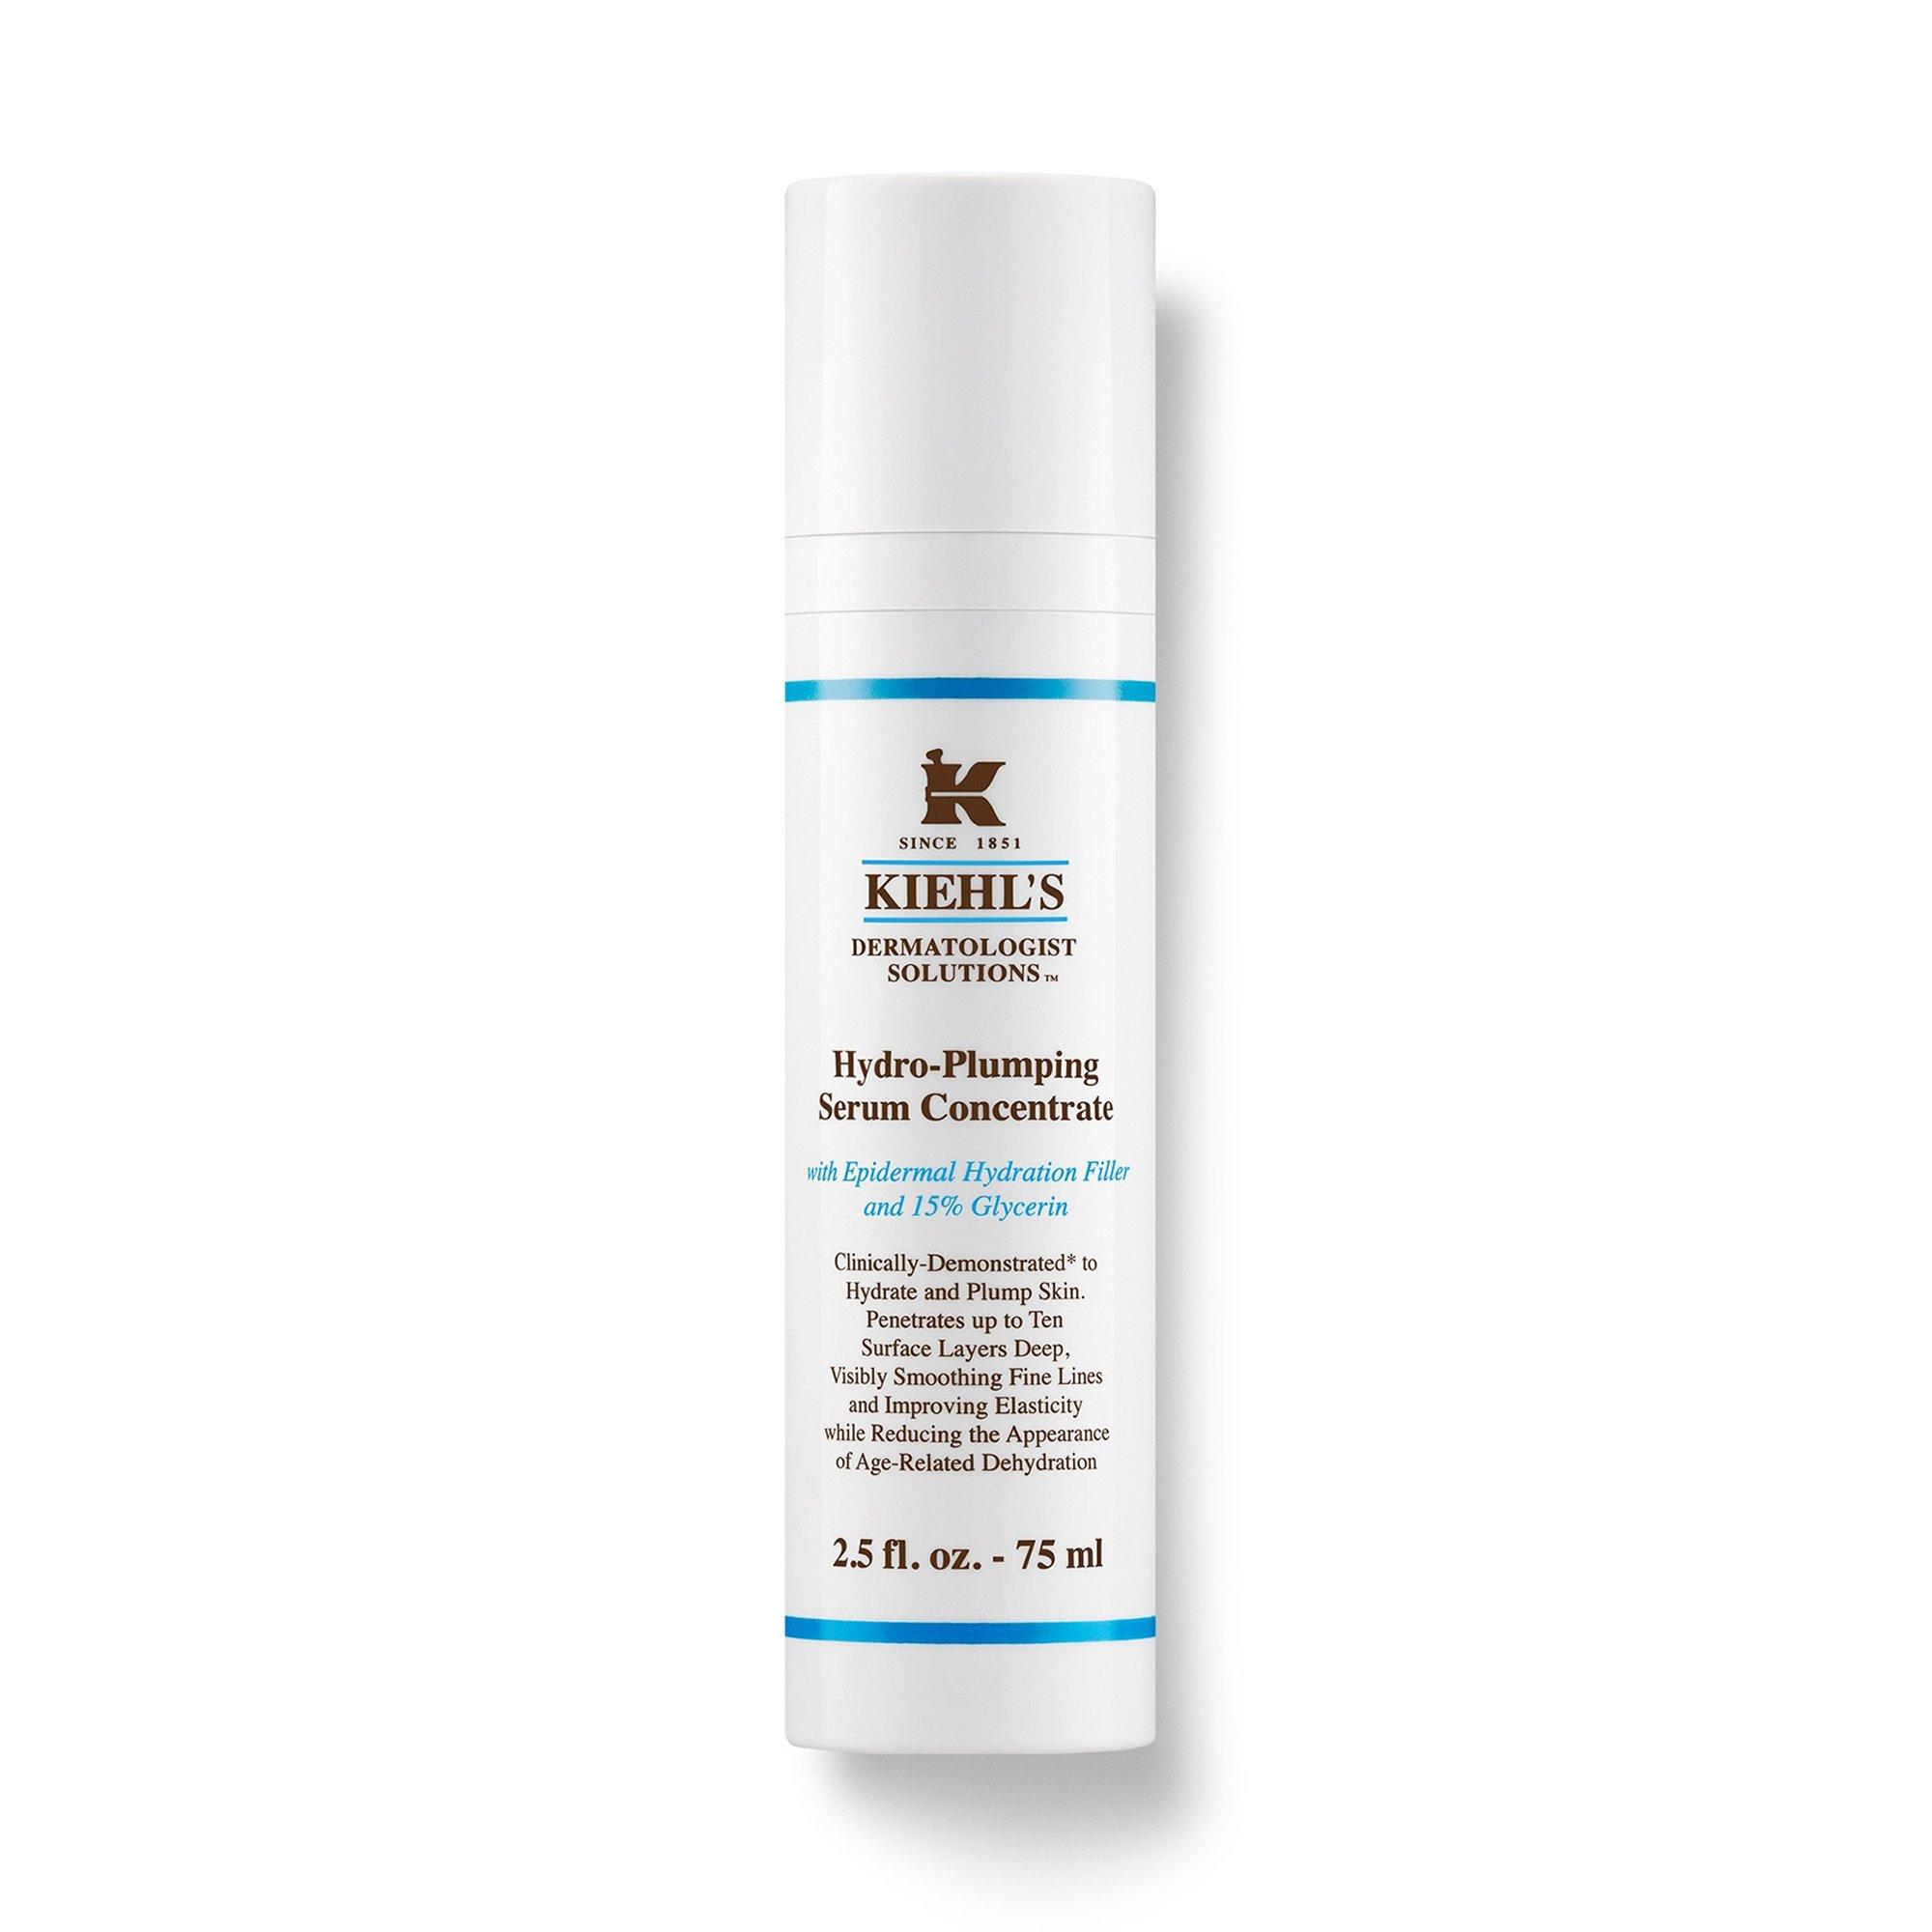 Image of Kiehl's Hydro-Plumping Serum Concentrate - 75ml